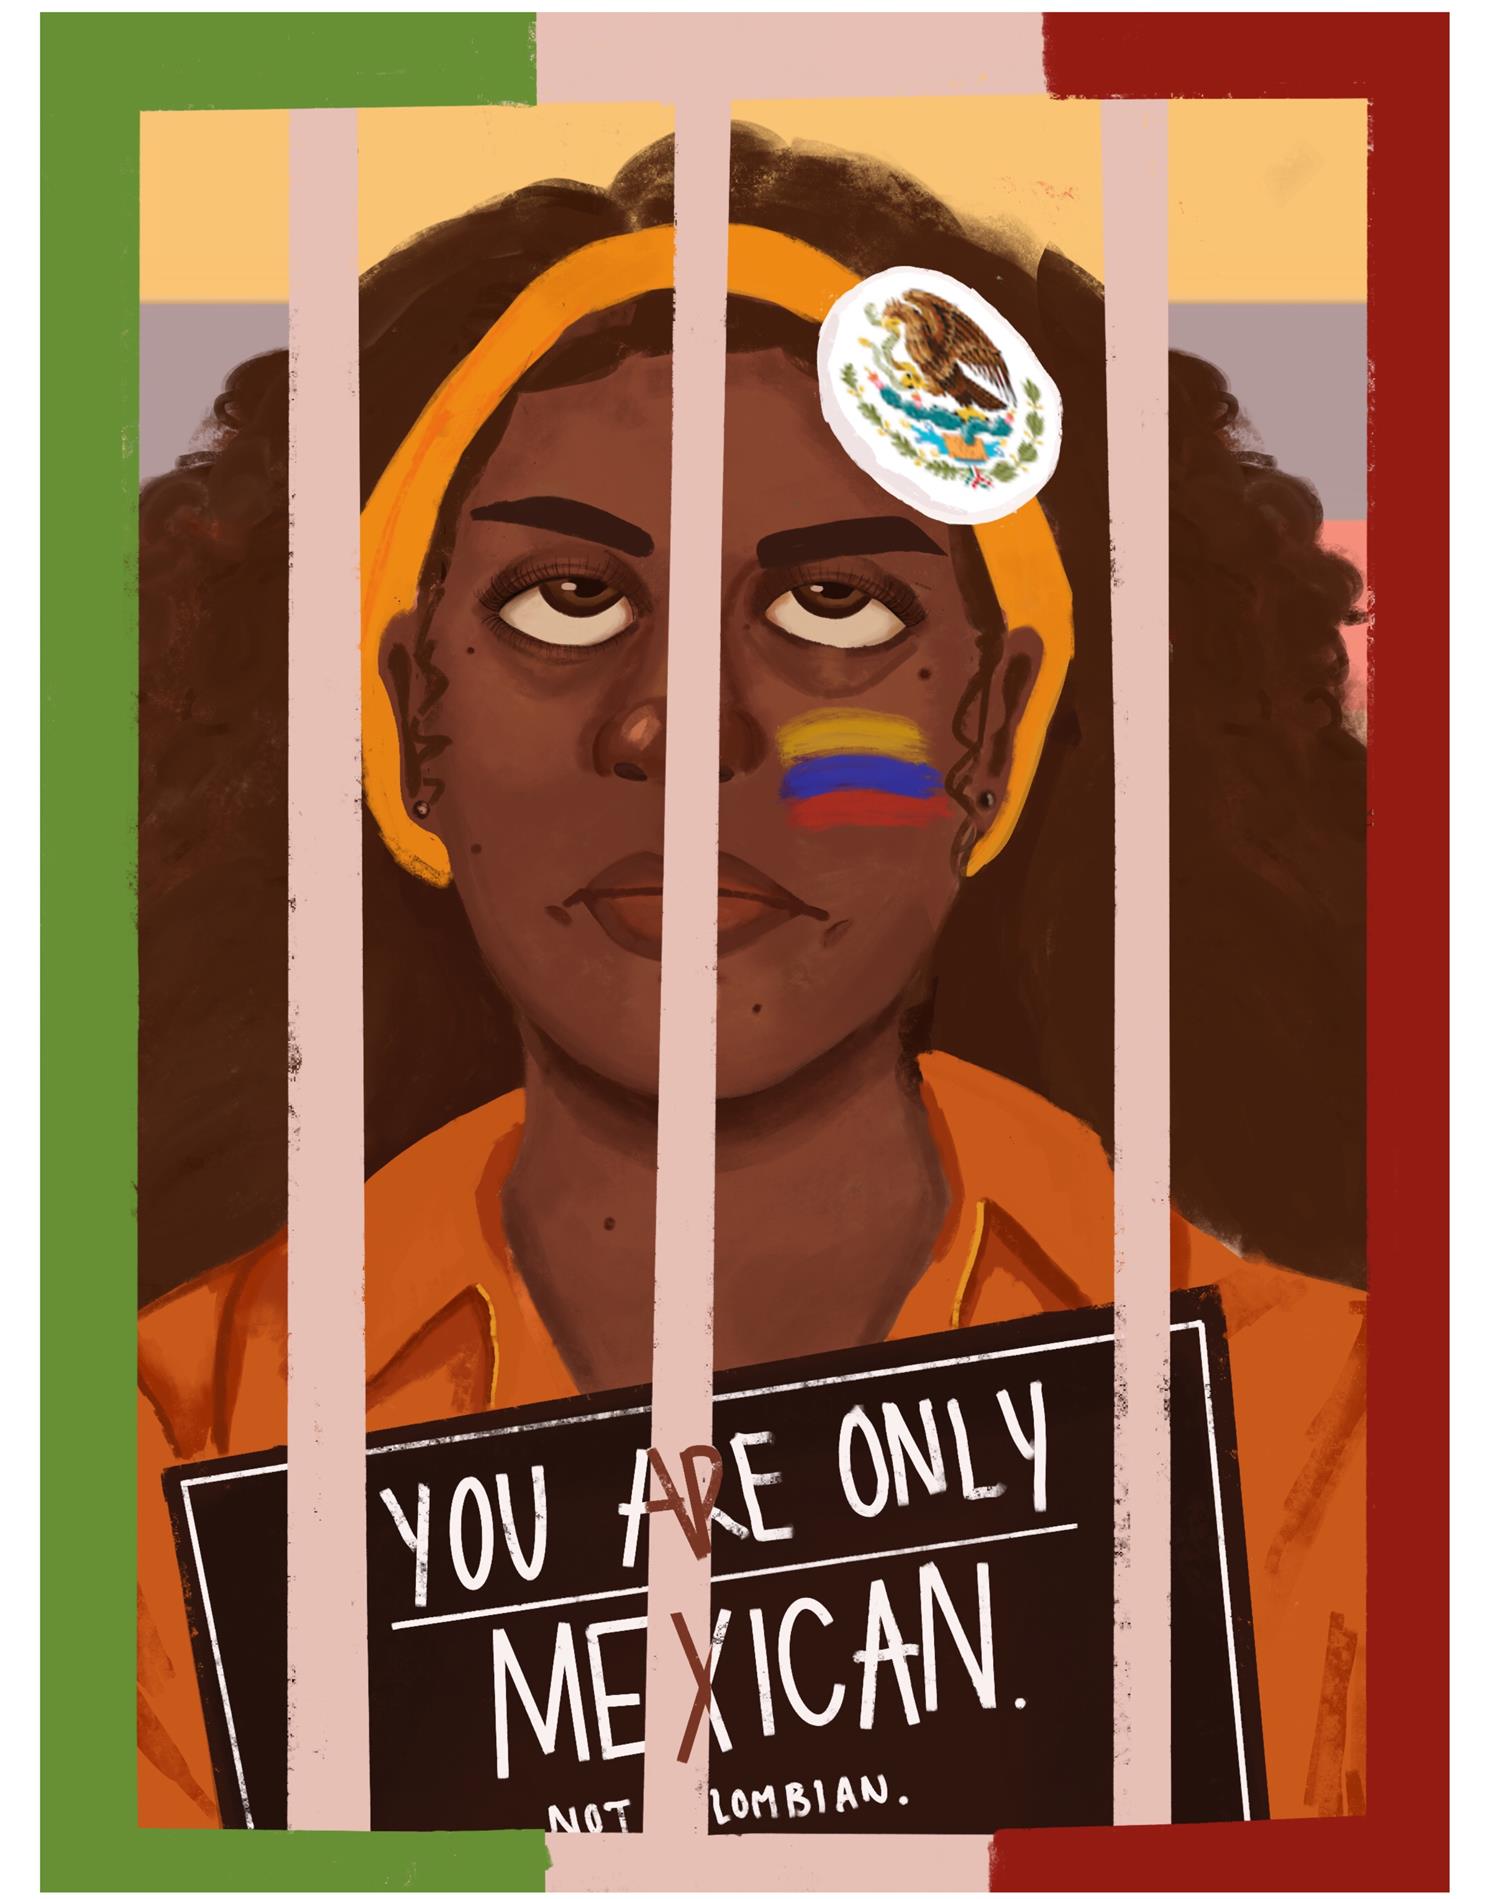 dark skinned girl behind bars outlined in red green and white holding sign stating you are only mexican not colombian